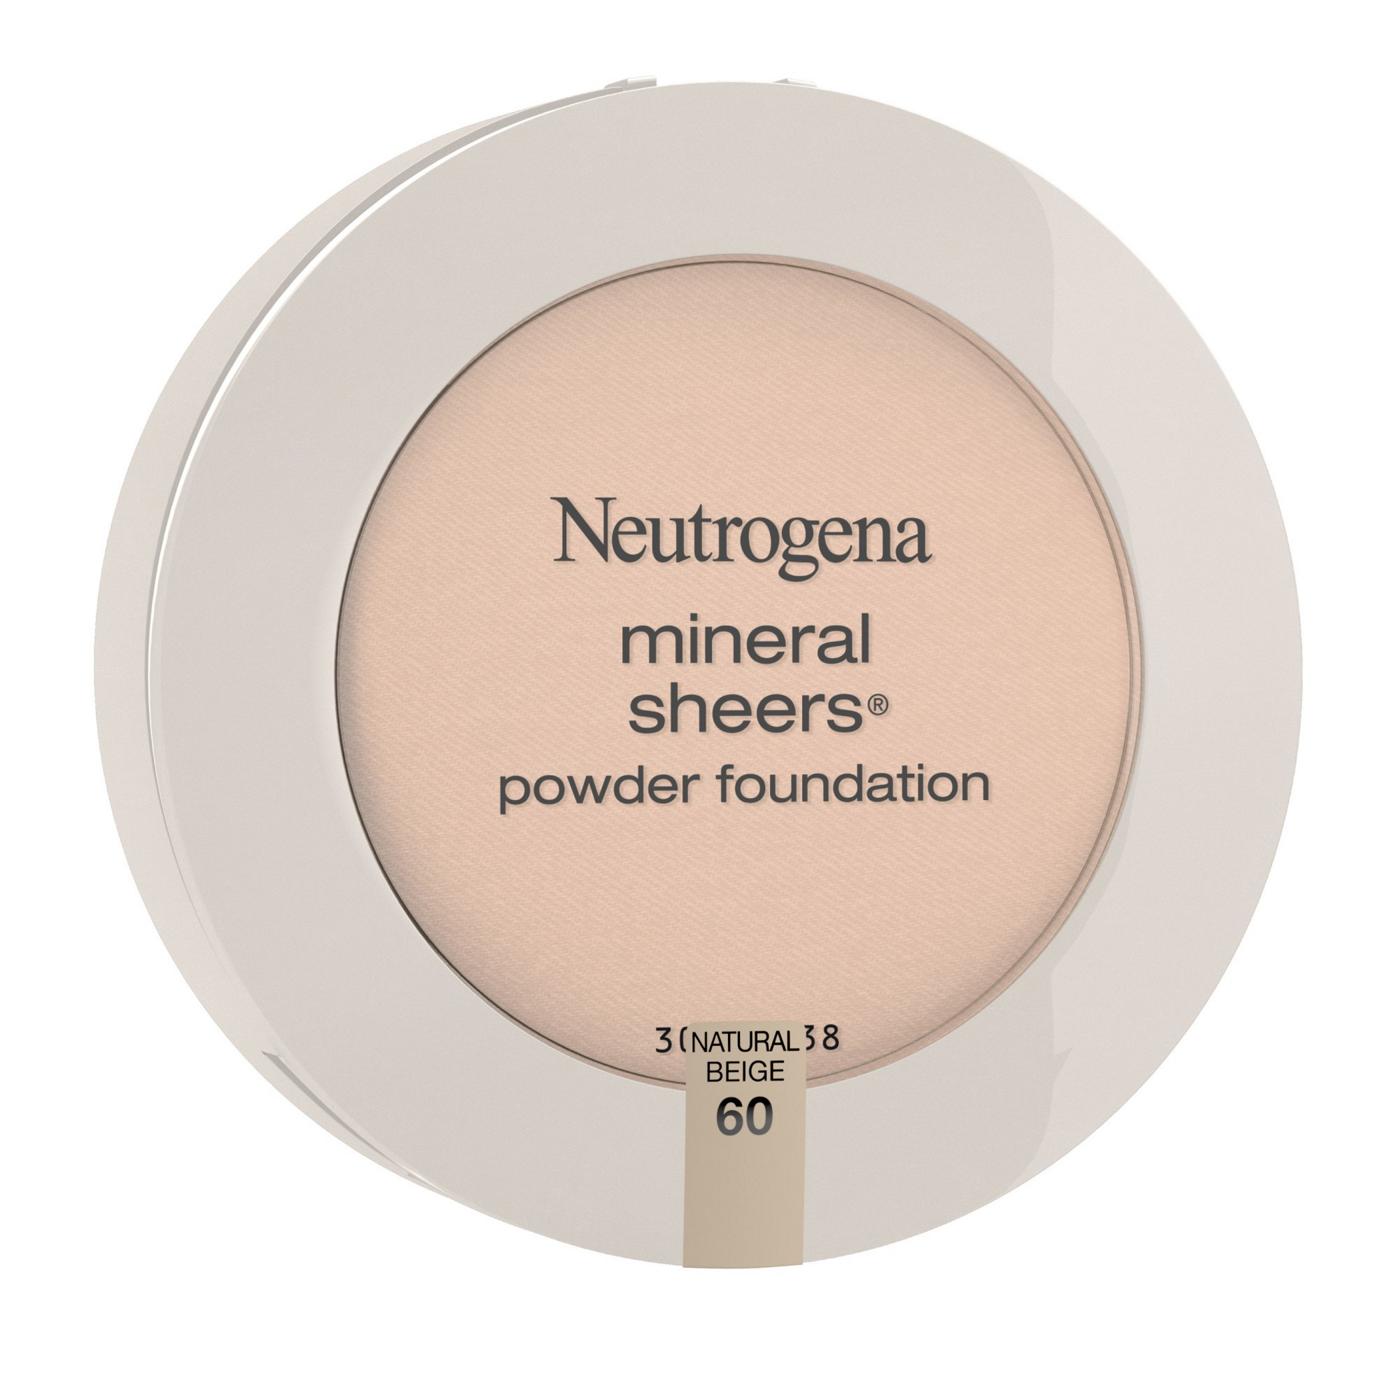 Neutrogena Mineral Sheers 60 Natural Beige Compact Powder Foundation; image 3 of 6